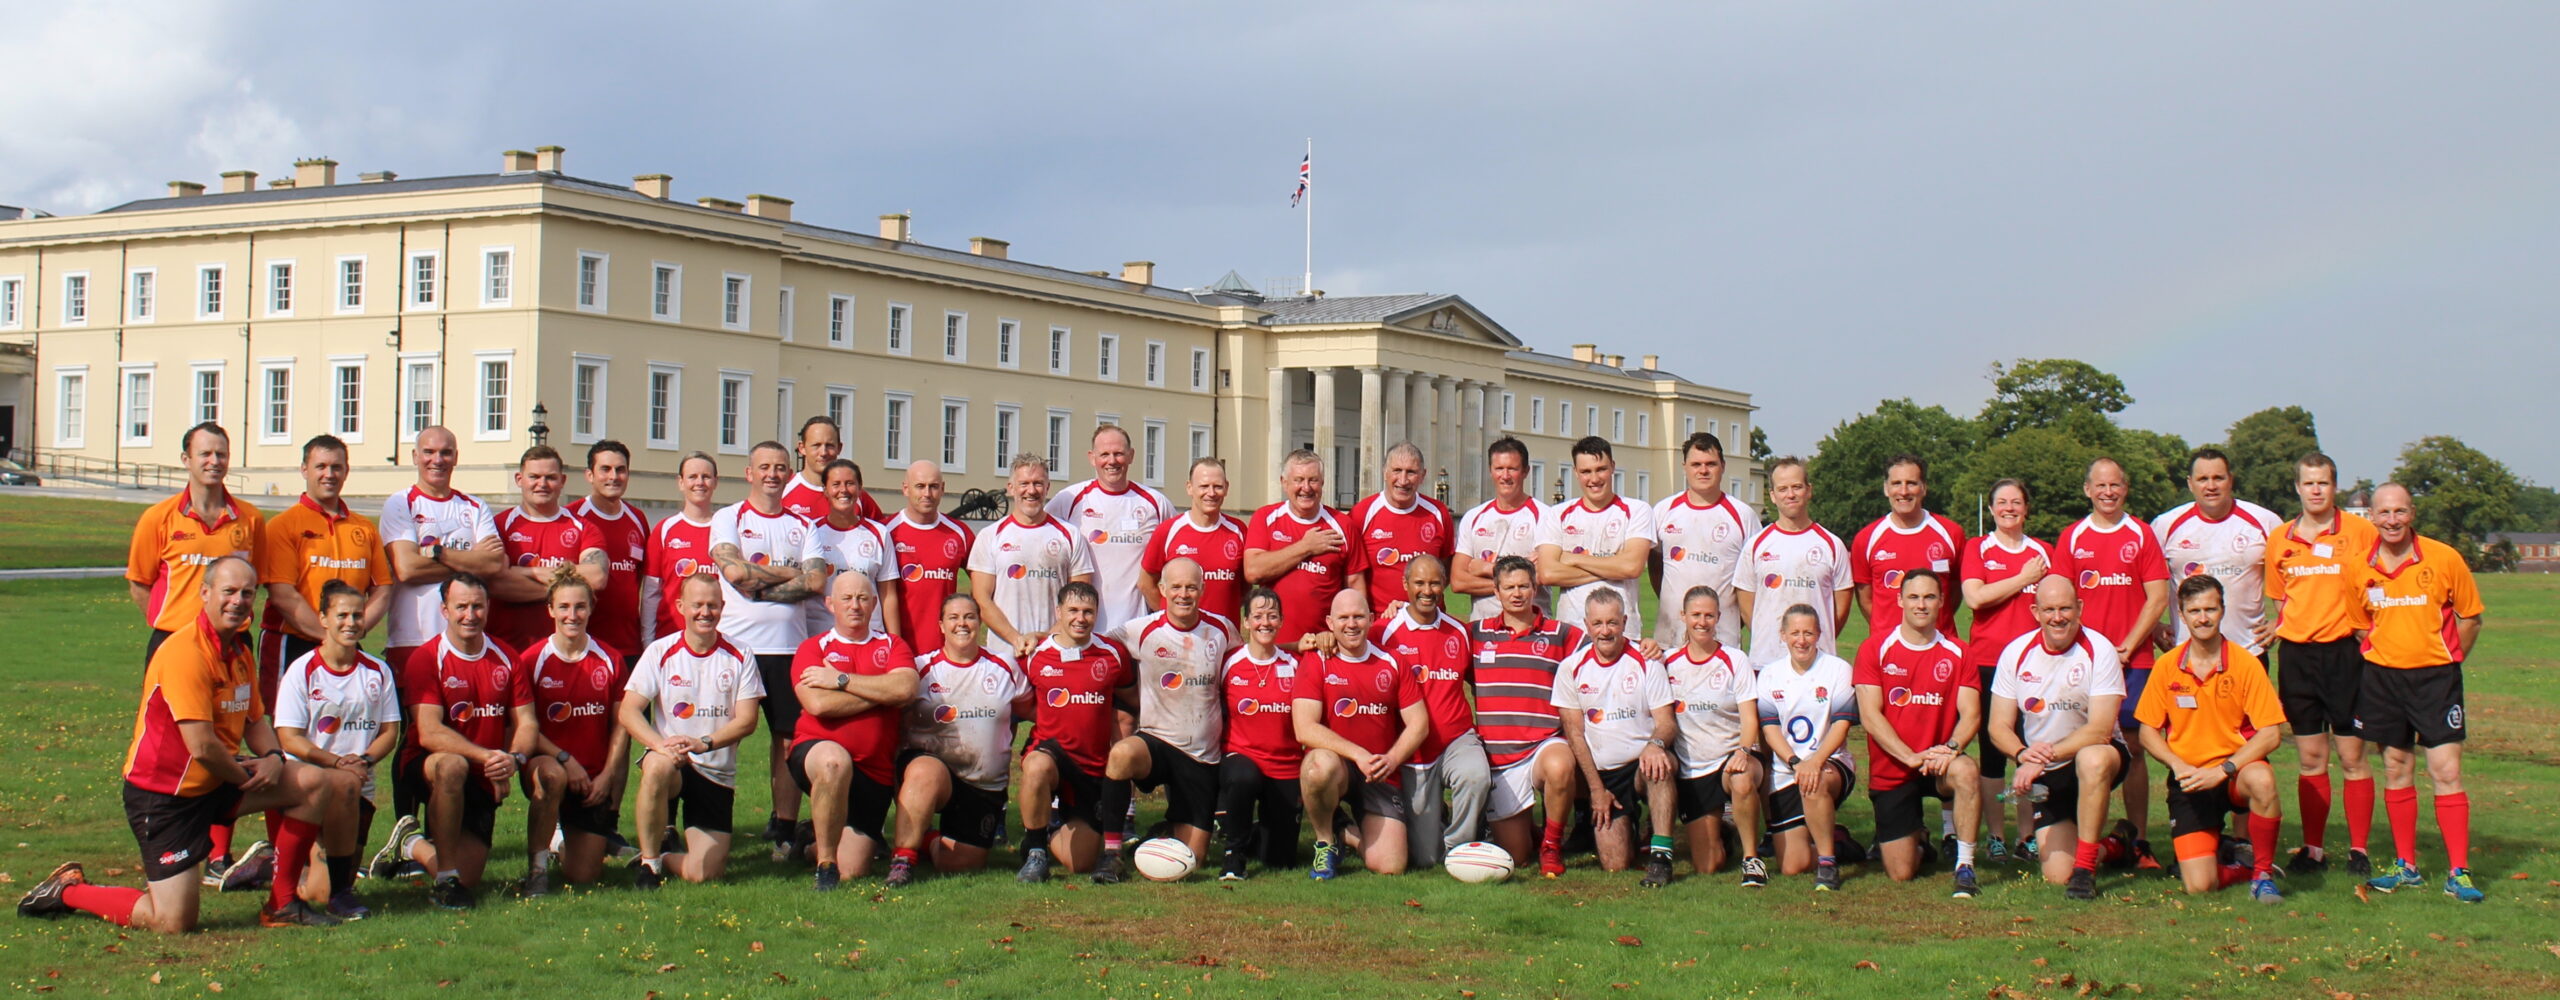 Leadership in Union event a reminder of what rugby offers the Army